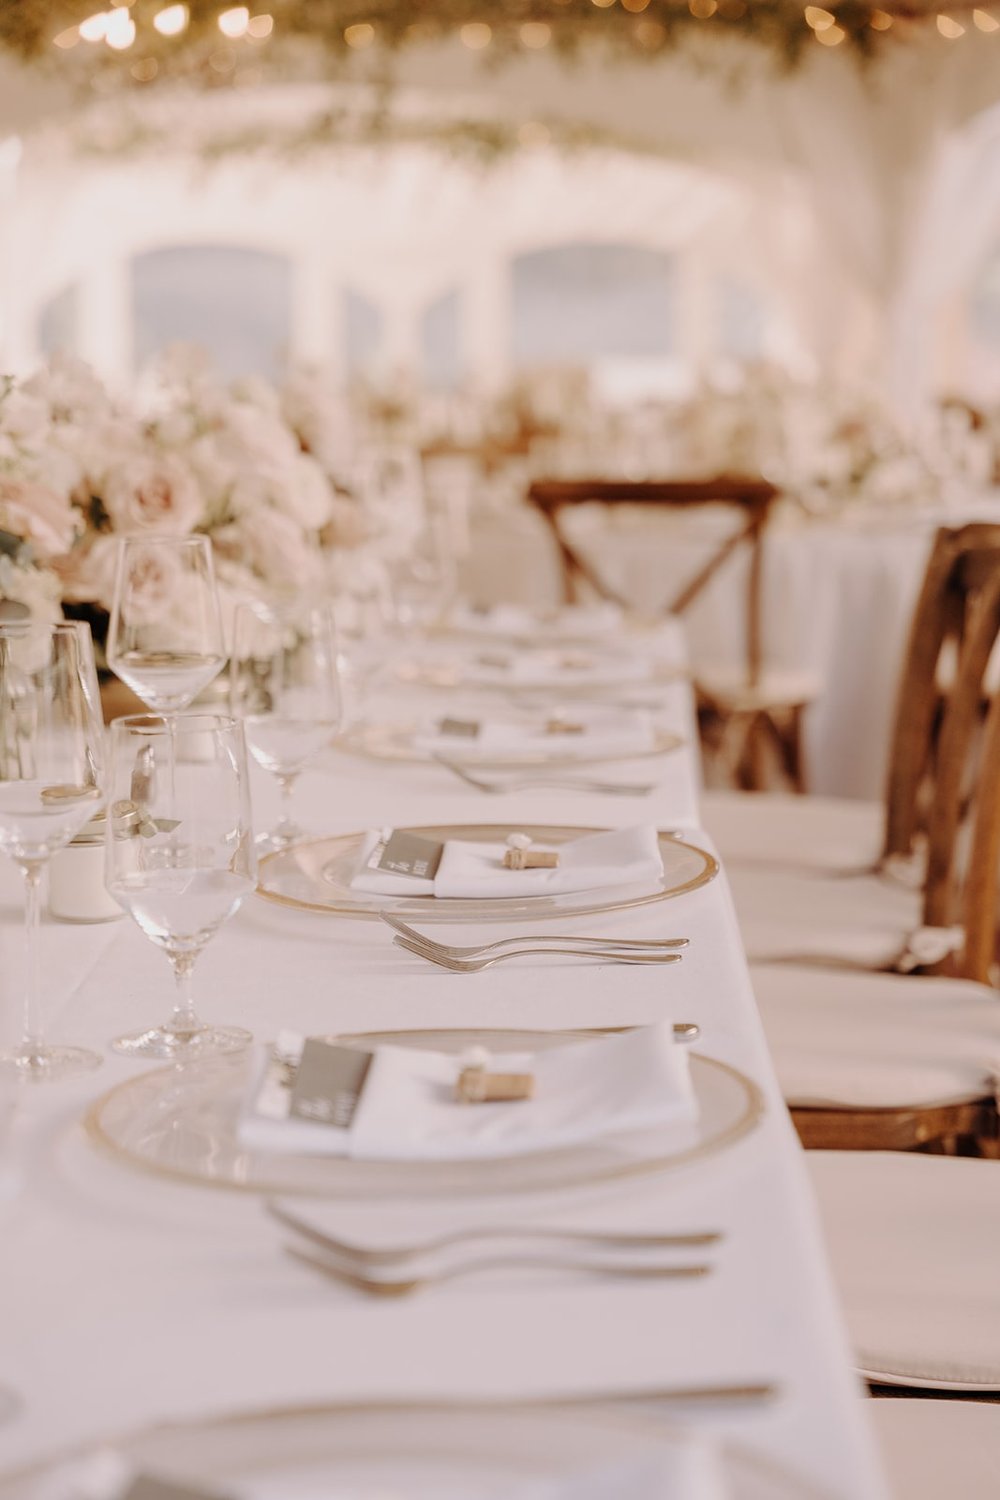 White reception tables and decorations at Washington wedding at Lairmont Manor